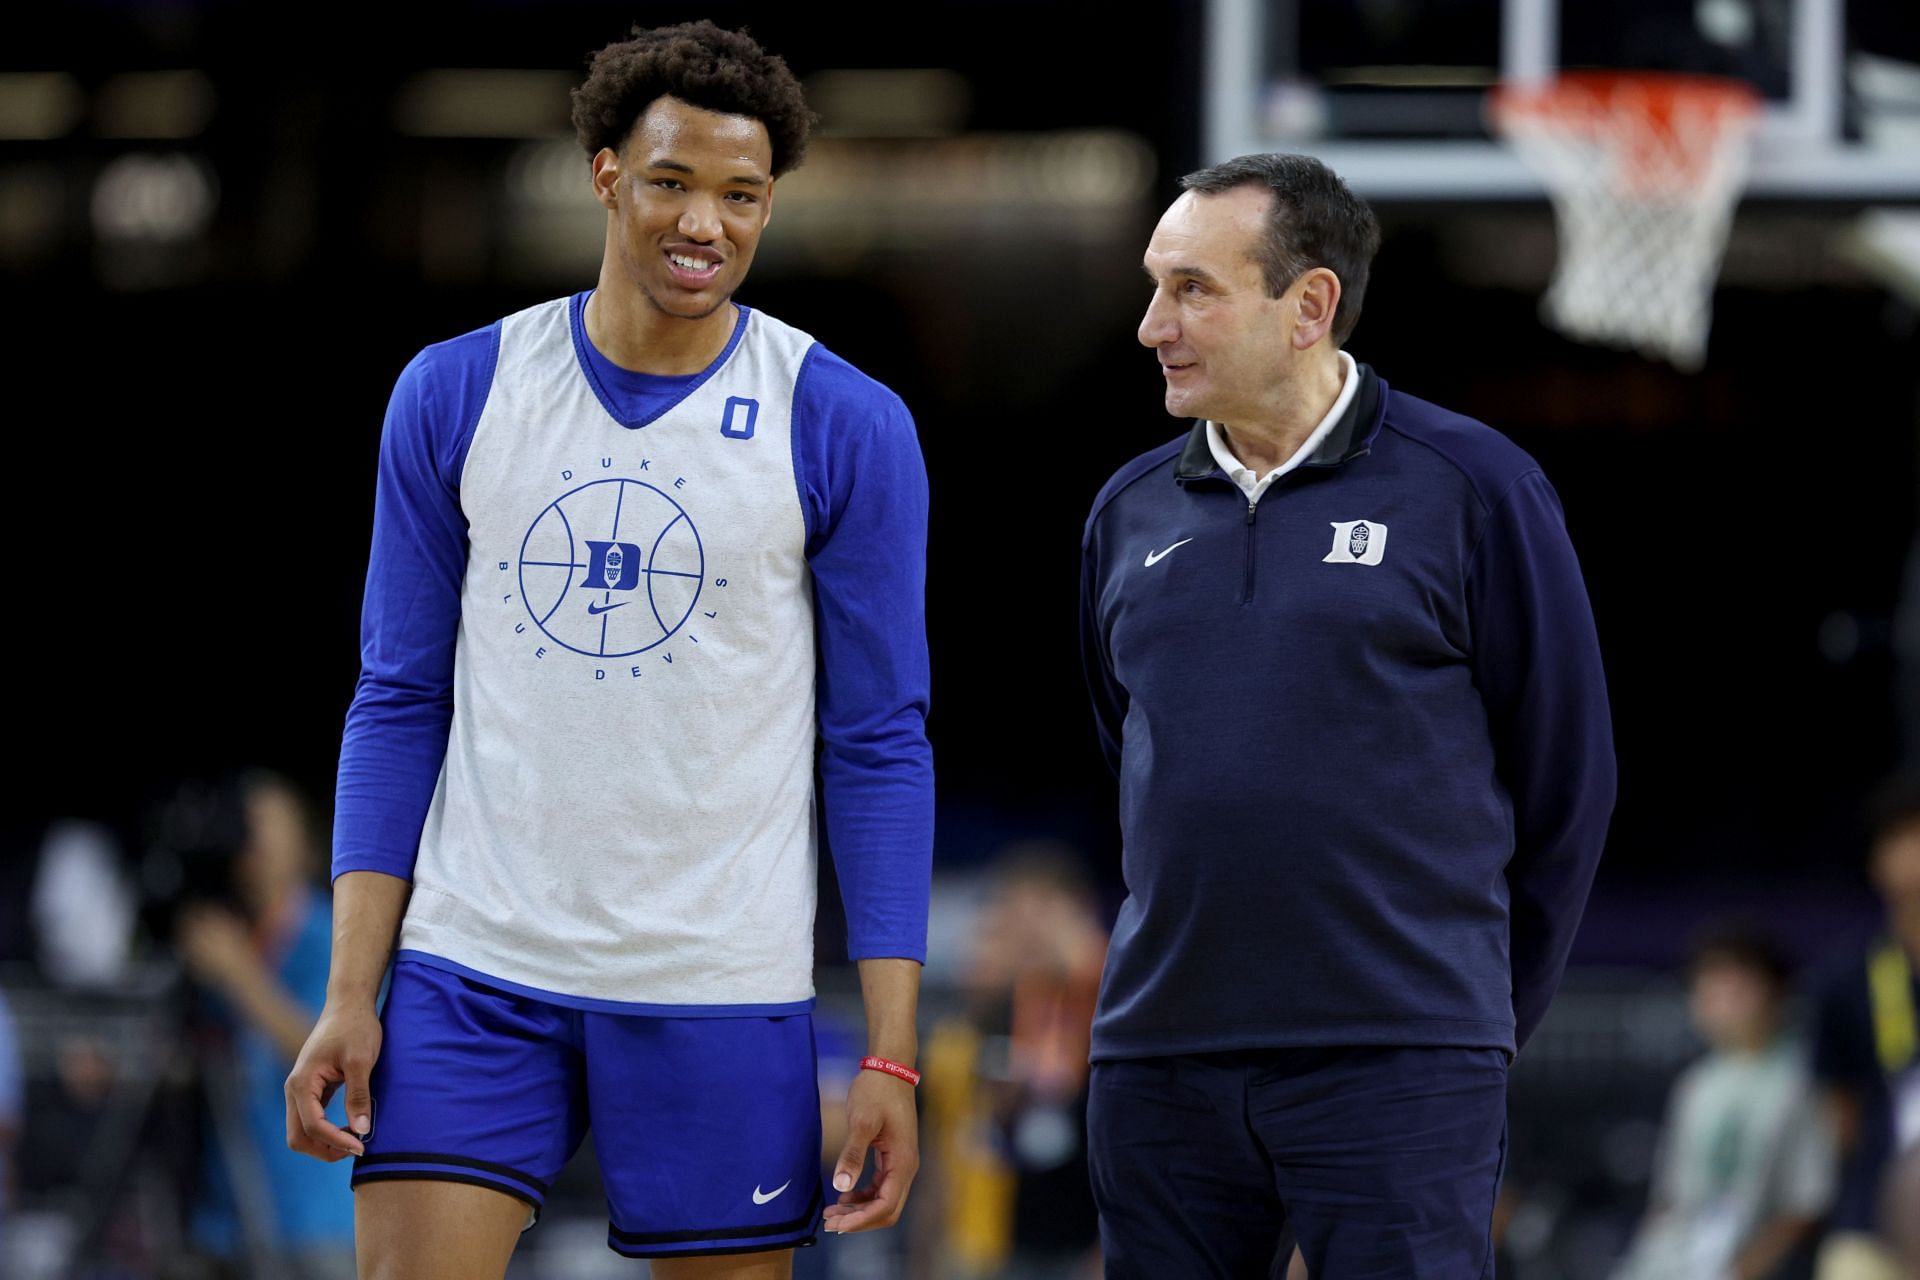 Mike Krzyzewski gets ready for his last Final Four with the Duke Blue Devils